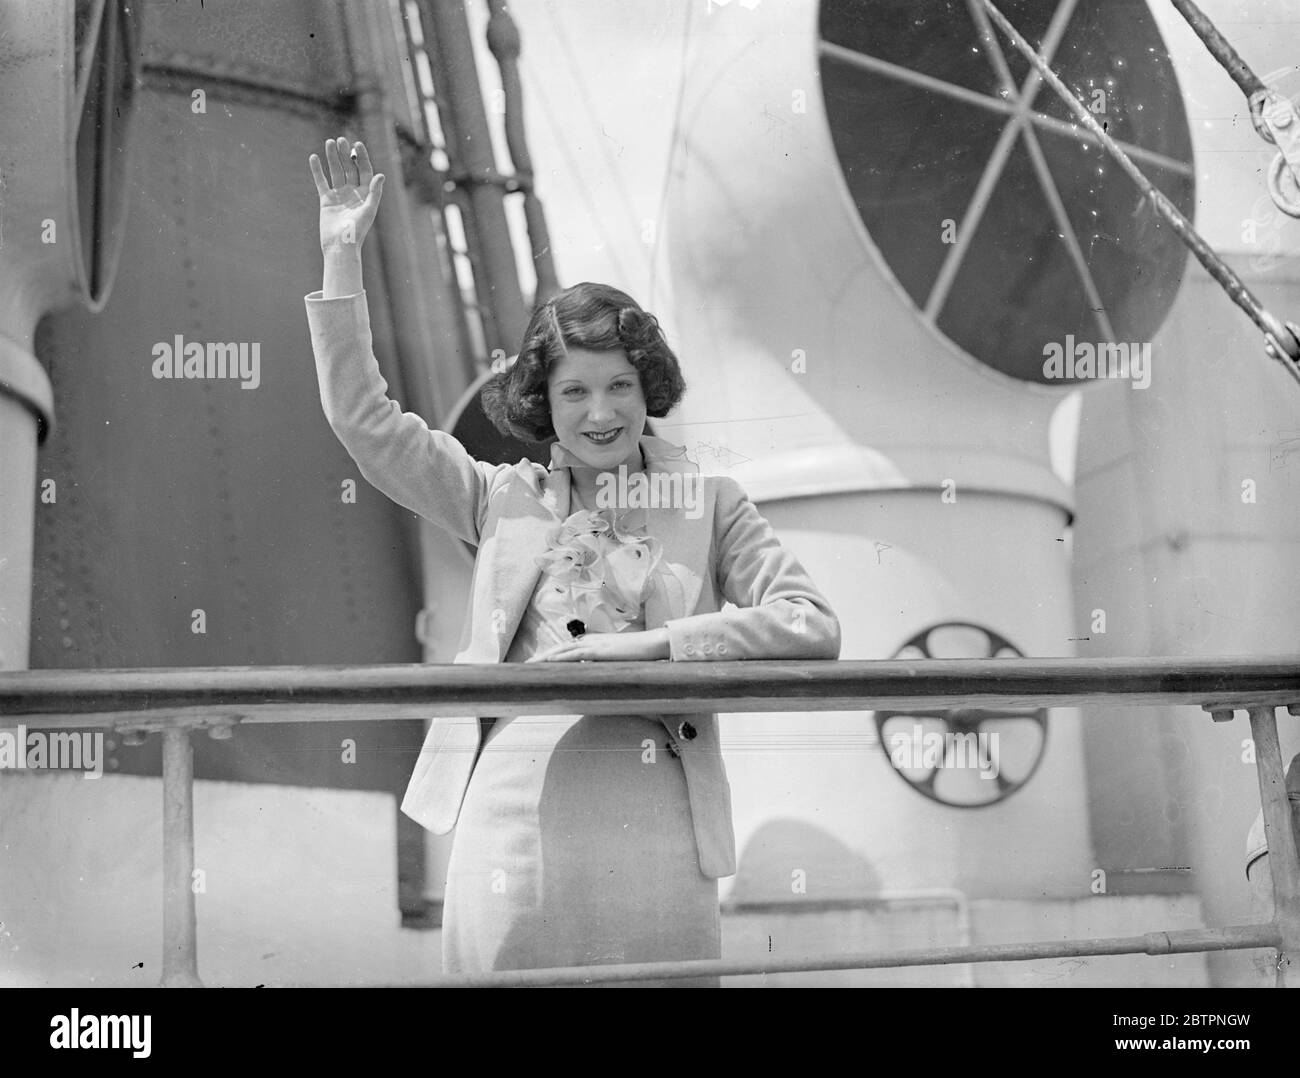 Paddy Naismith arrives home. Msis Paddy Naismith, well-known air woman and motor racing driver, arrived at Southampton on the liner Aquitania on her return higher from America. Photo shows, miss Paddy Naismith on her arrival at Southampton. 22 June 1937 Stock Photo